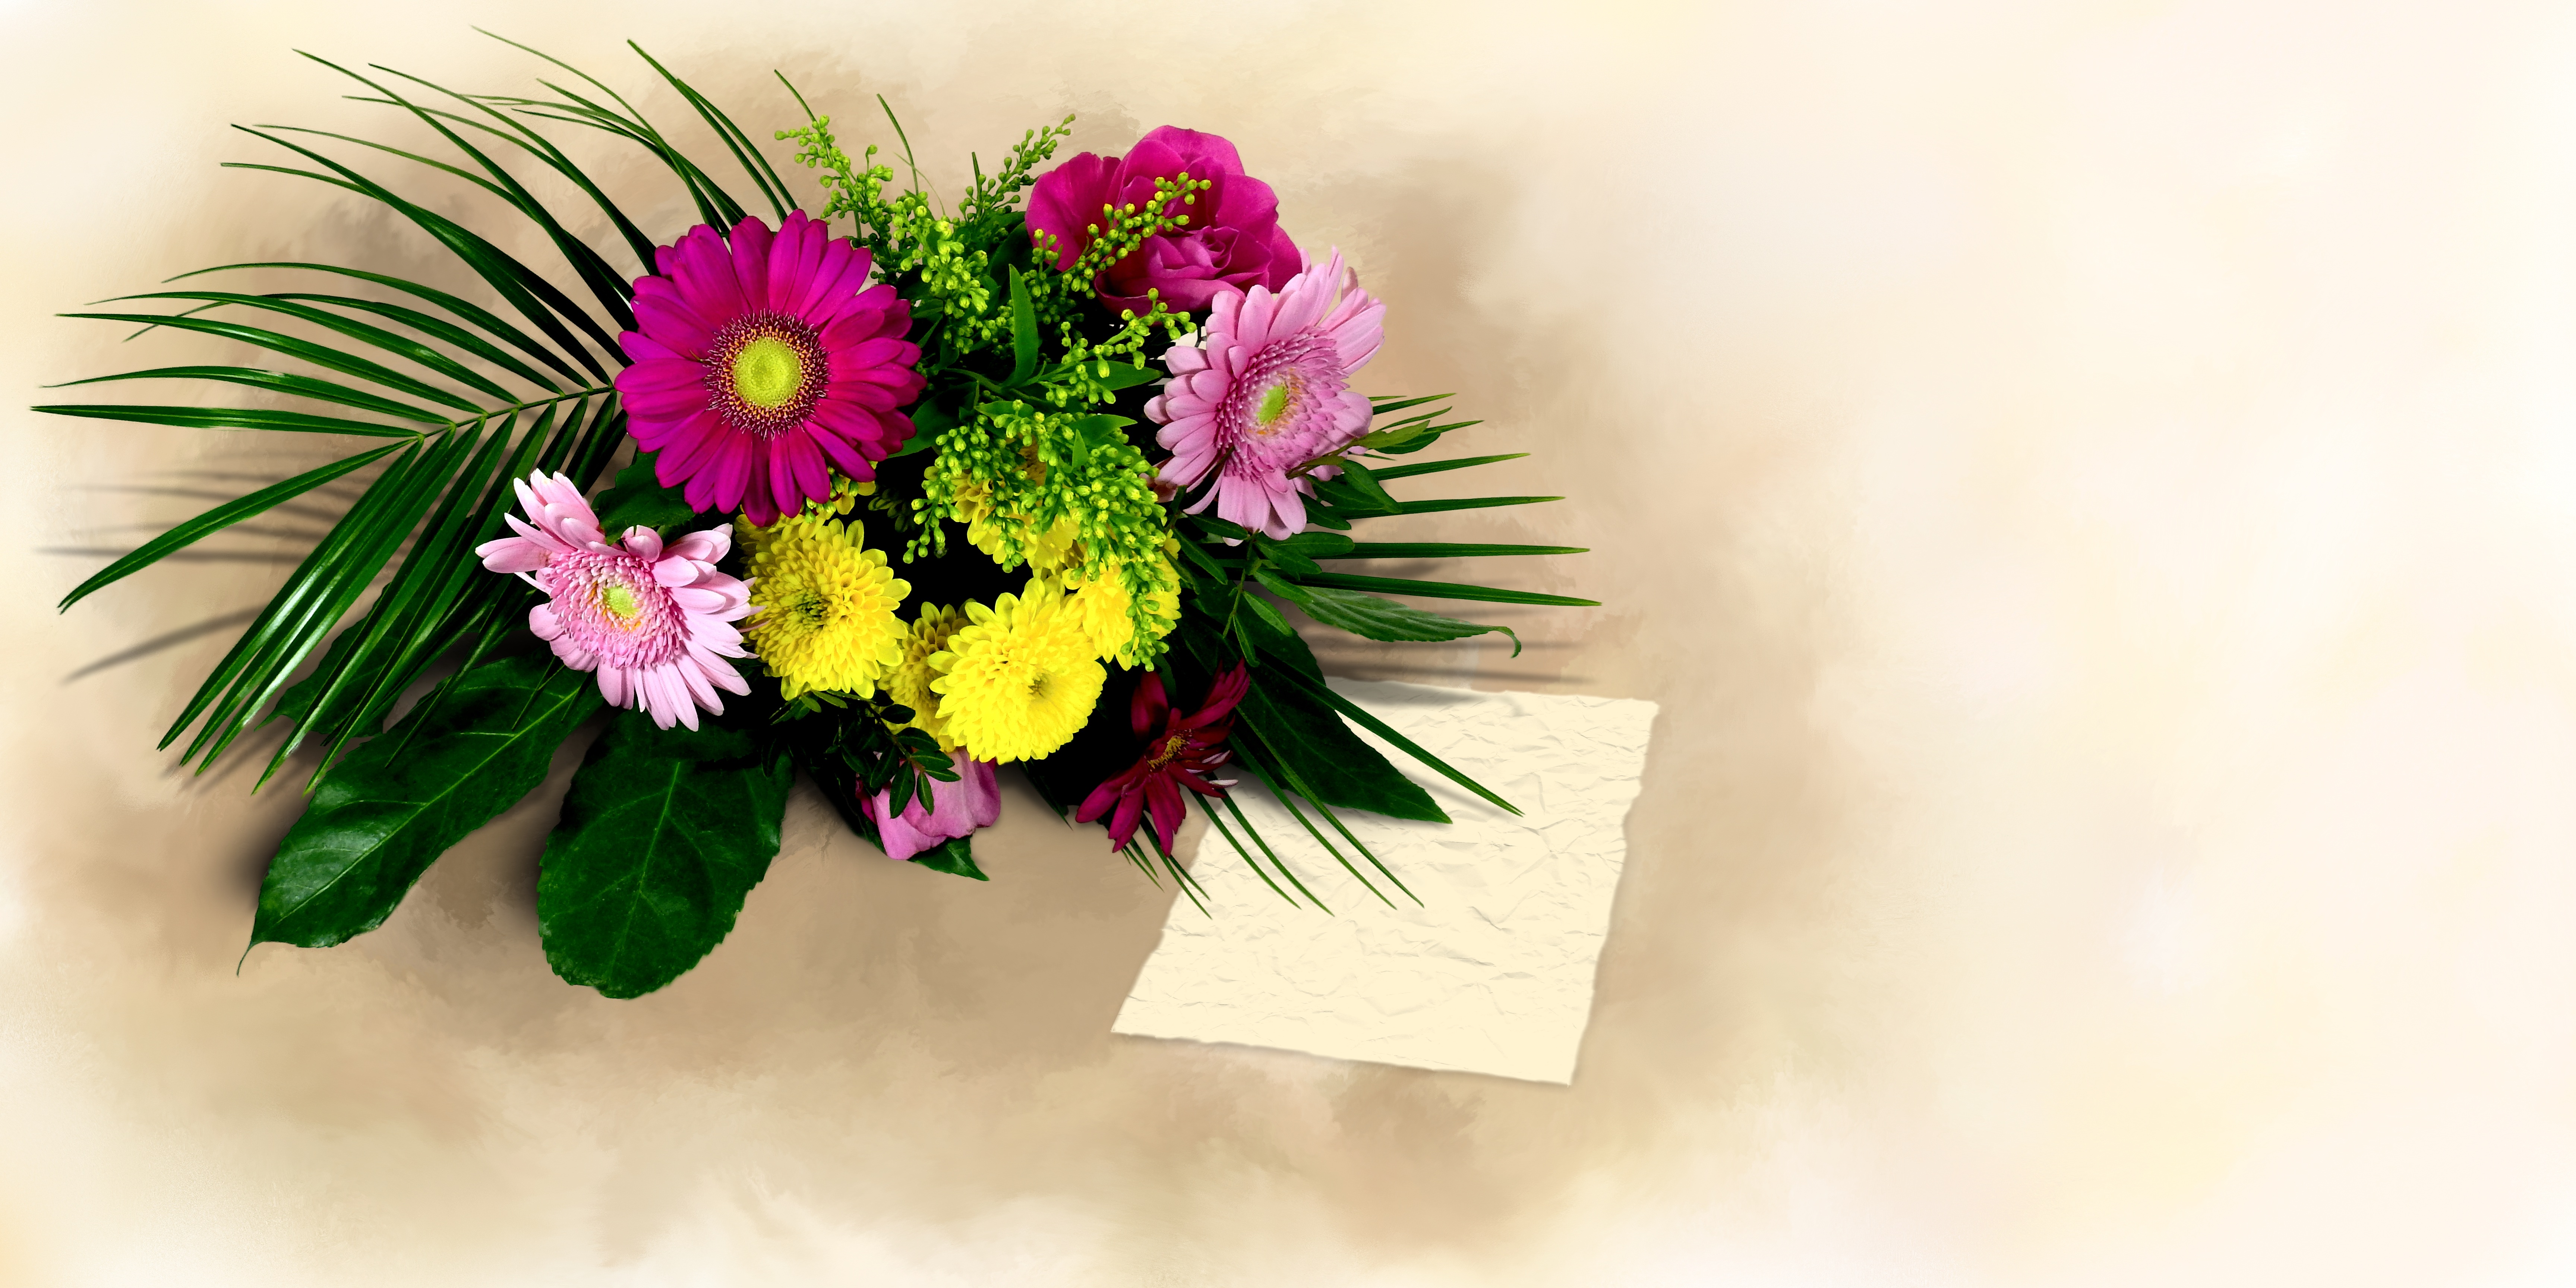 Wallpapers flowers Beautiful bouquet floral on the desktop